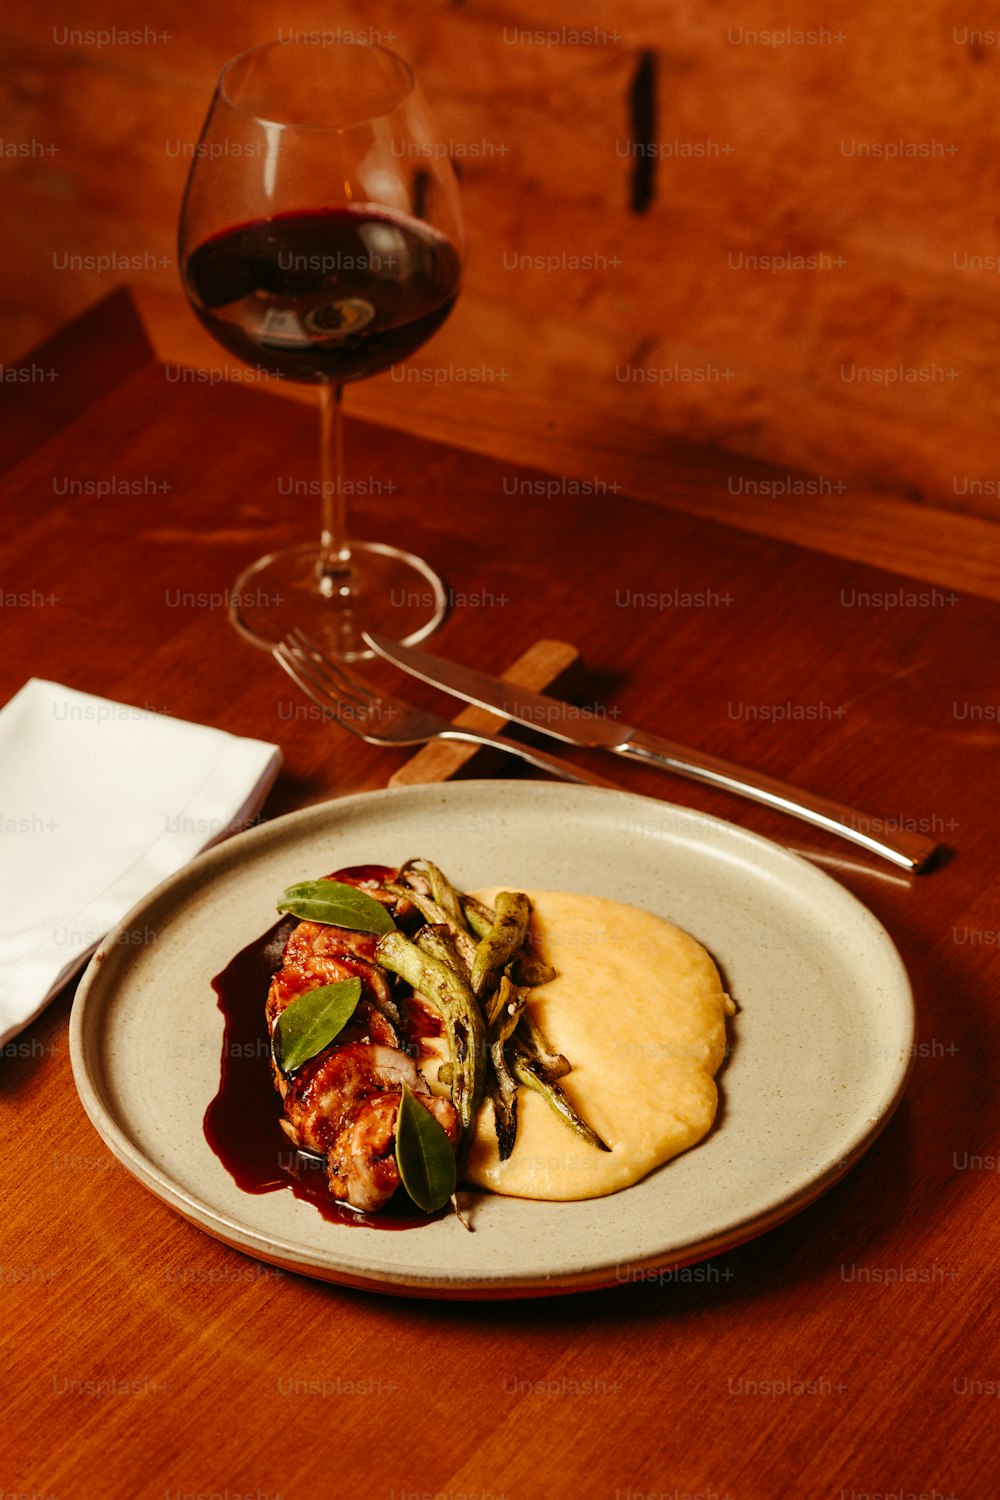 a plate of food and a glass of wine on a table